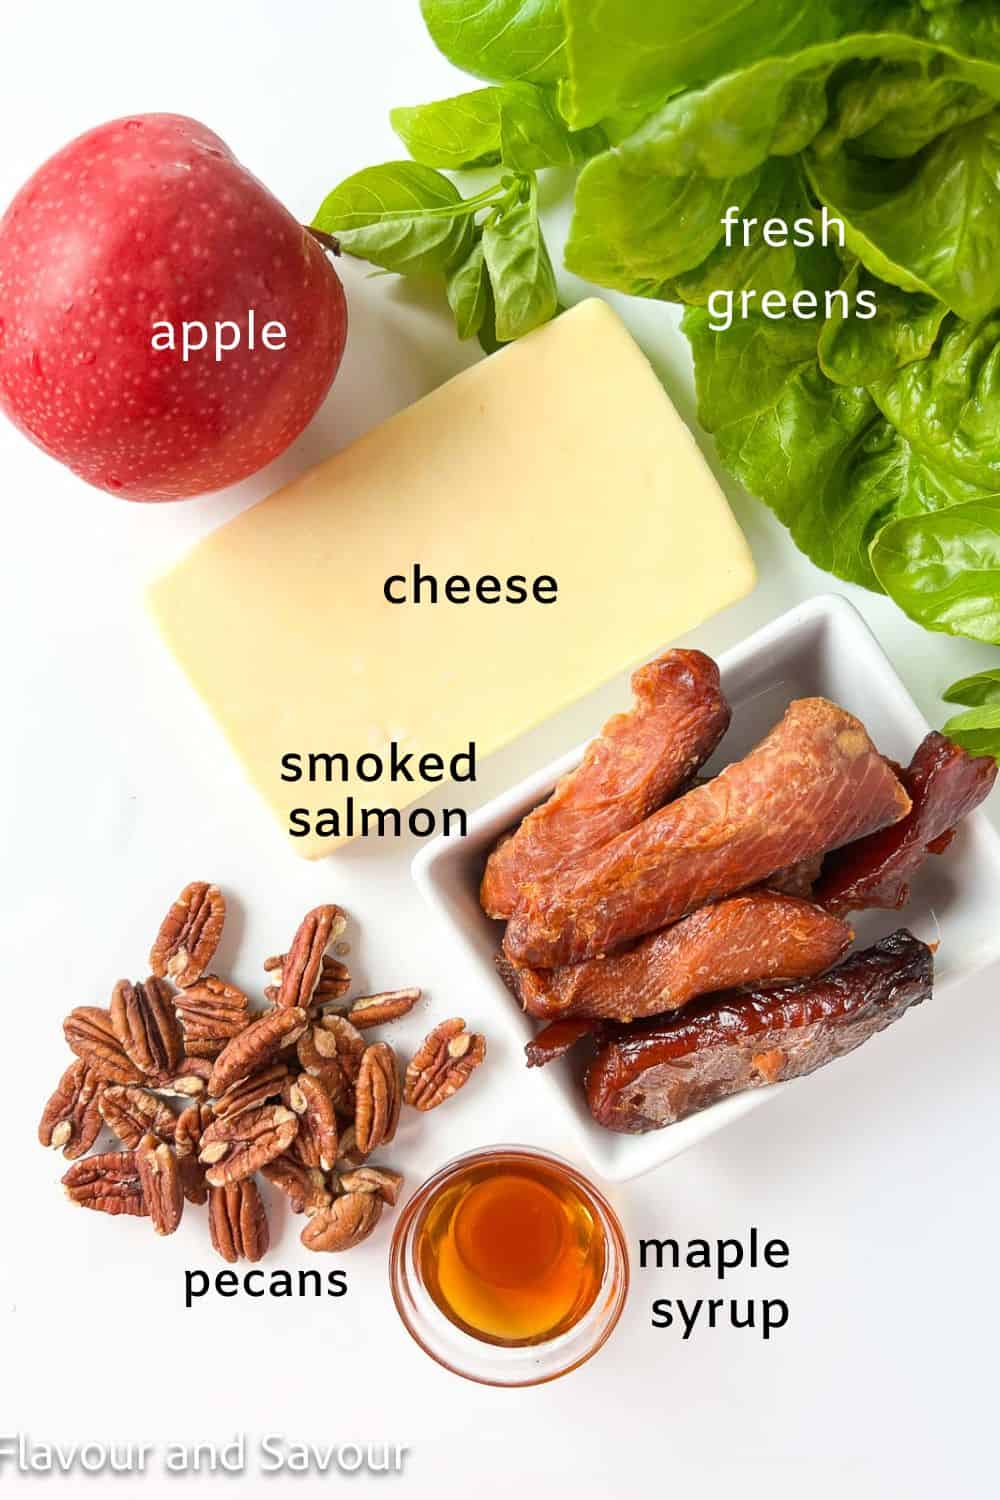 Ingredients for smoked salmon salad:  fresh greens, apple, cheese, smoked salmon, pecans, and maple syrup.